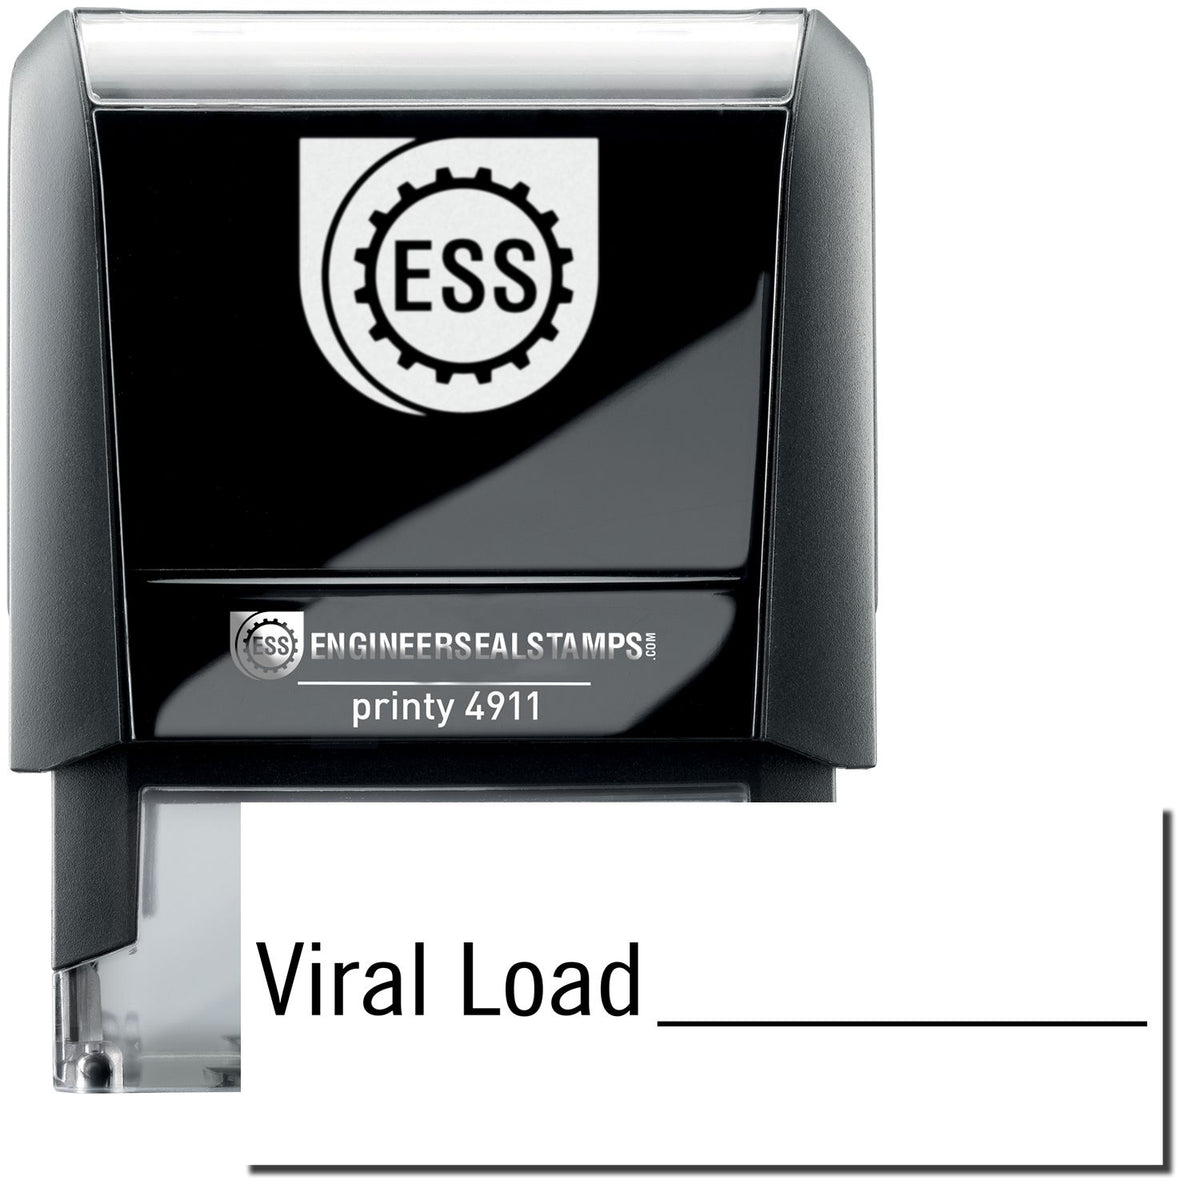 A self-inking stamp with a stamped image showing how the text &quot;Viral Load&quot; with a line is displayed after stamping.